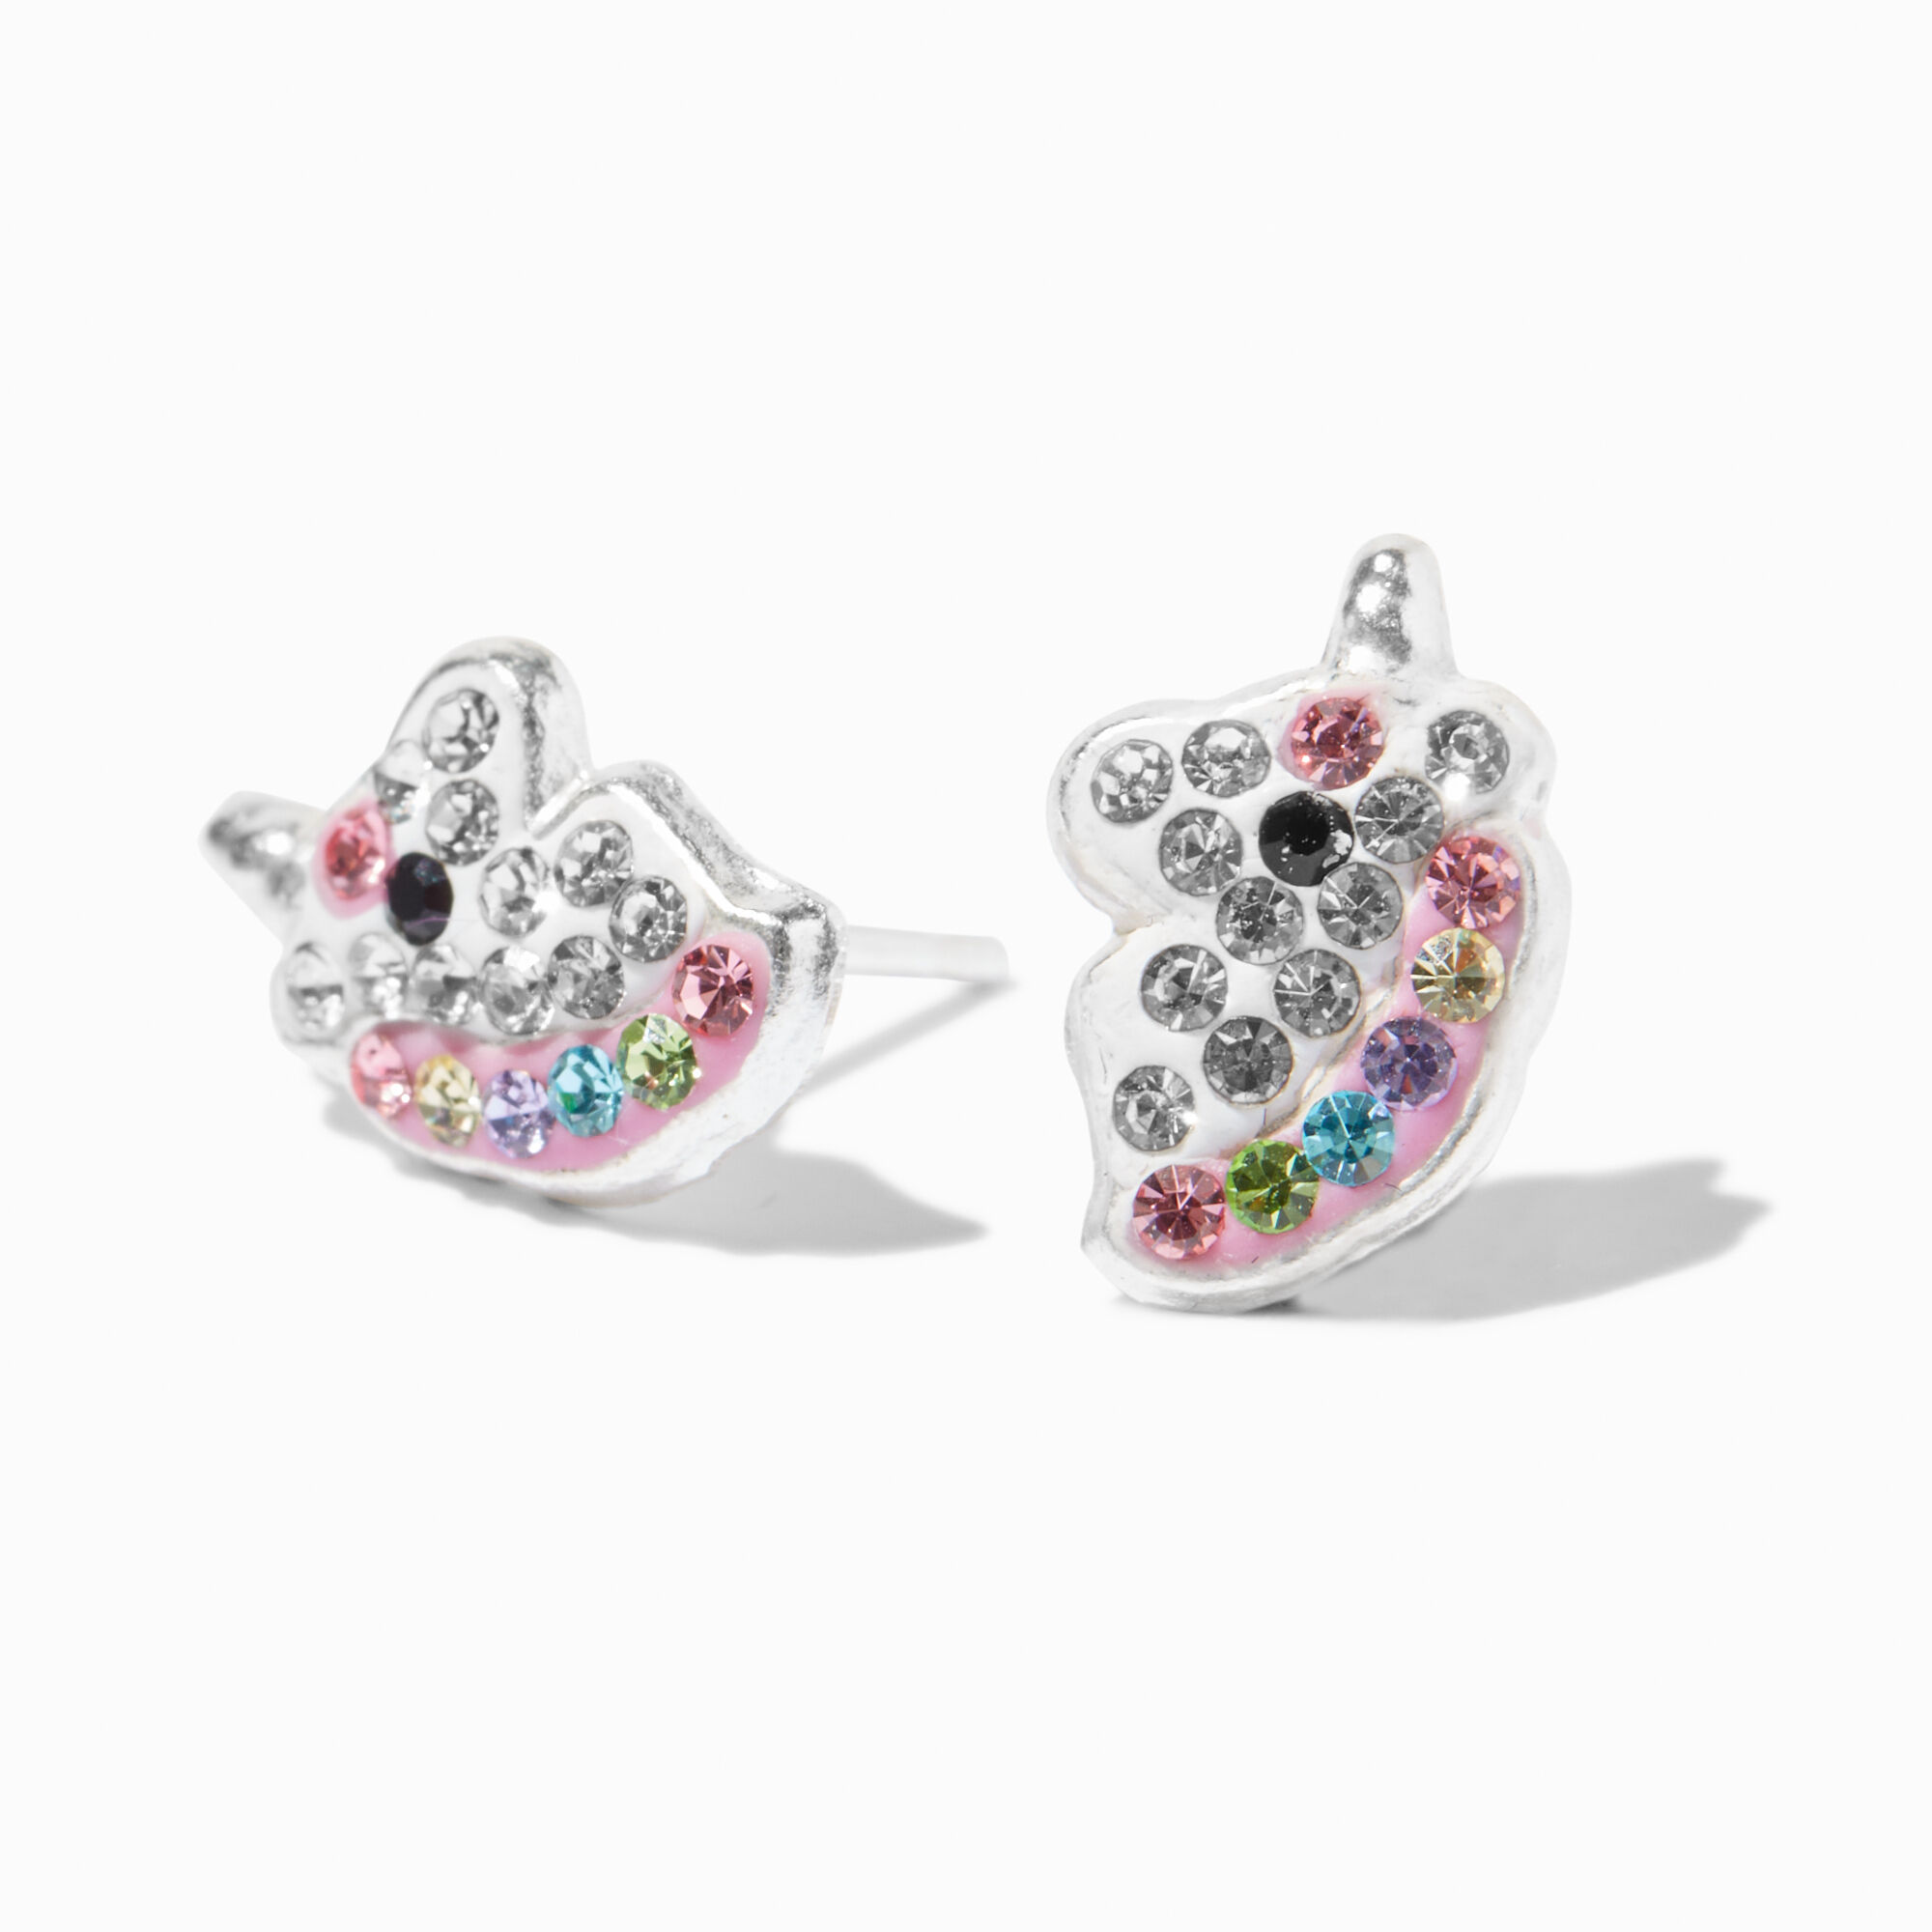 View Claires Multicolored Crystal Unicorn Stud Earrings Silver information